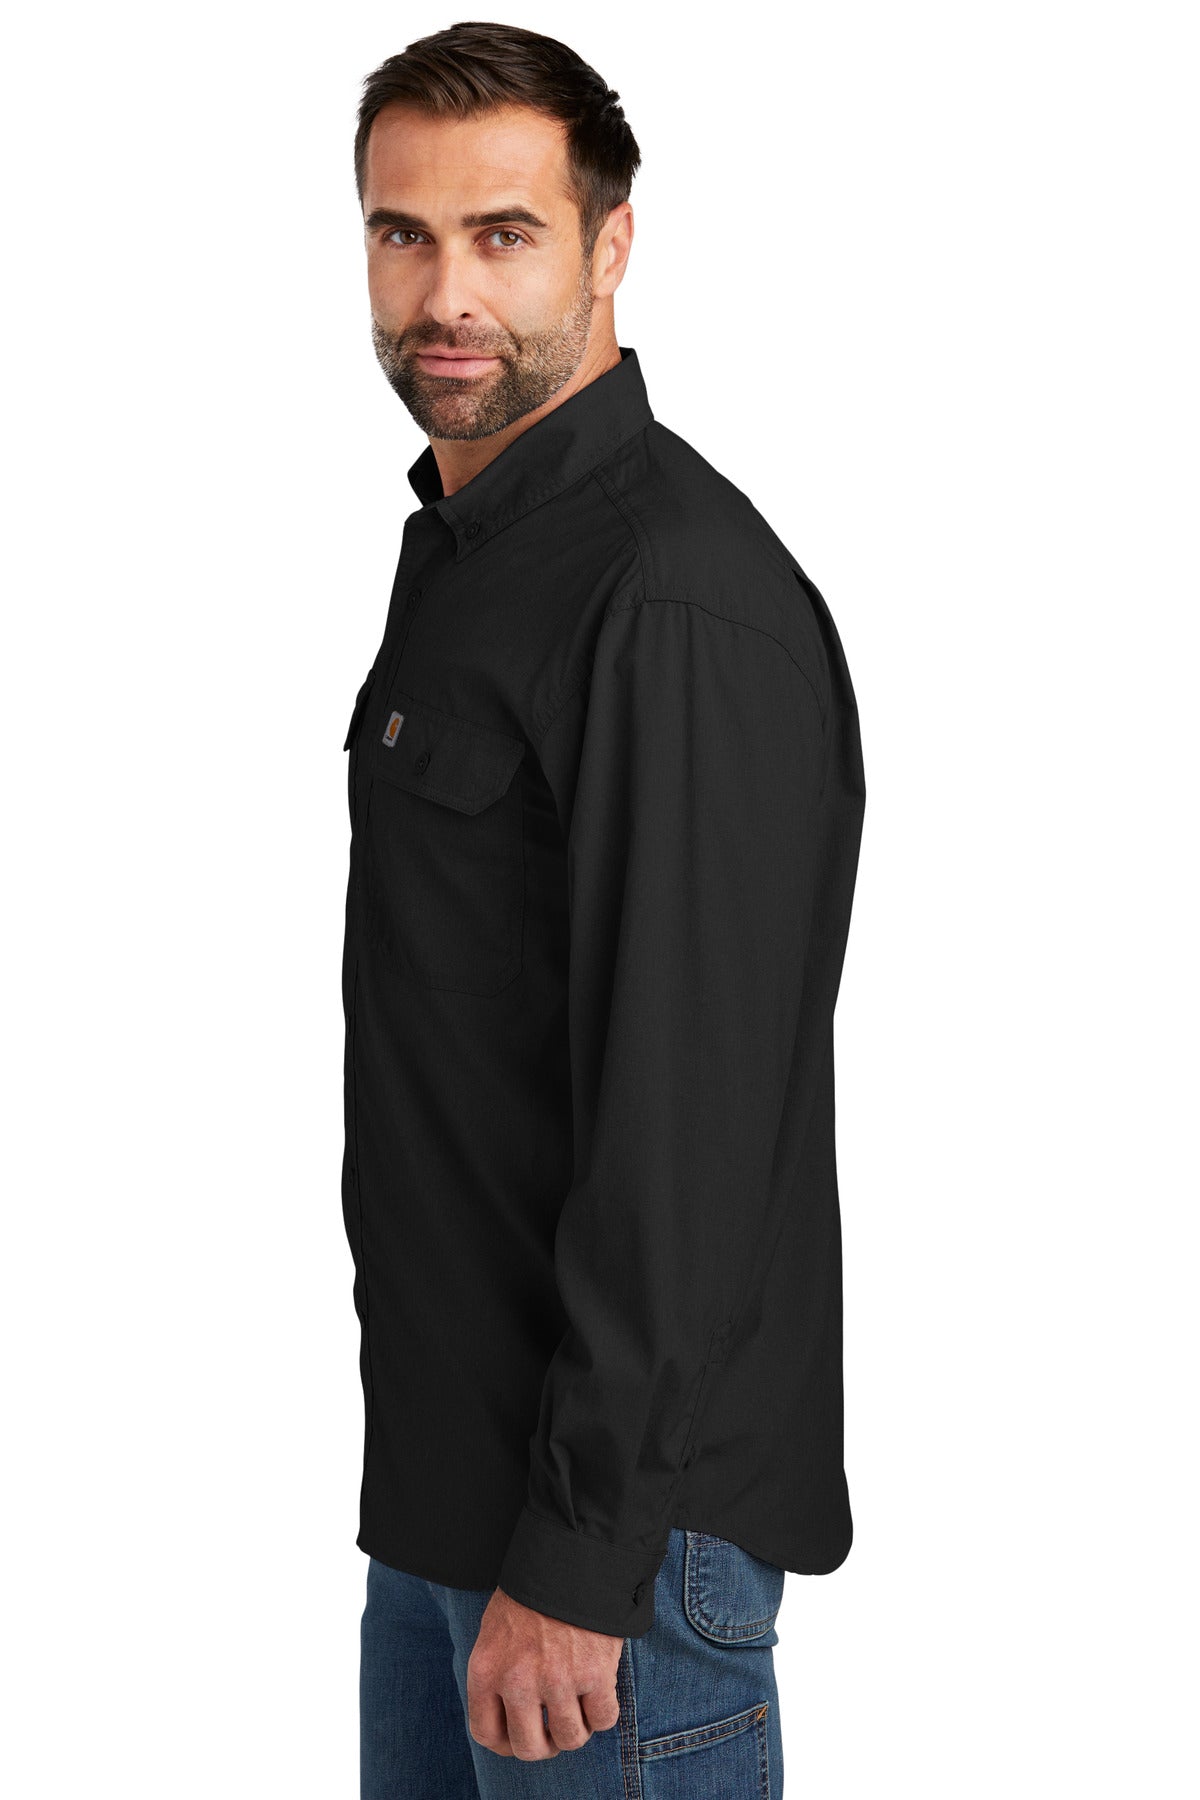 Carhartt Force® Solid Long Sleeve Shirt CT105291 - DFW Impression